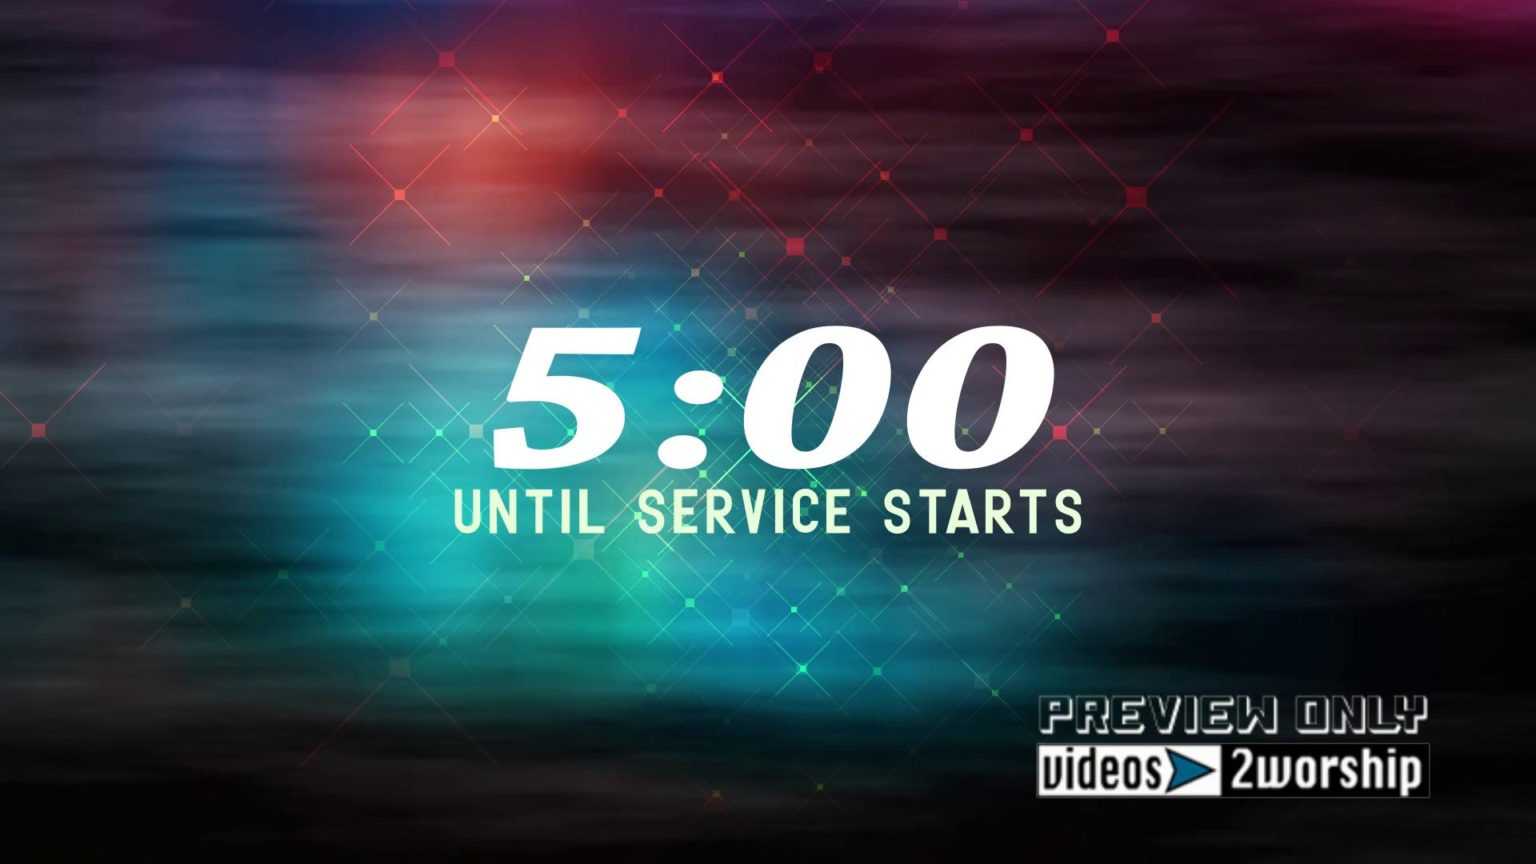 free church service countdown timers